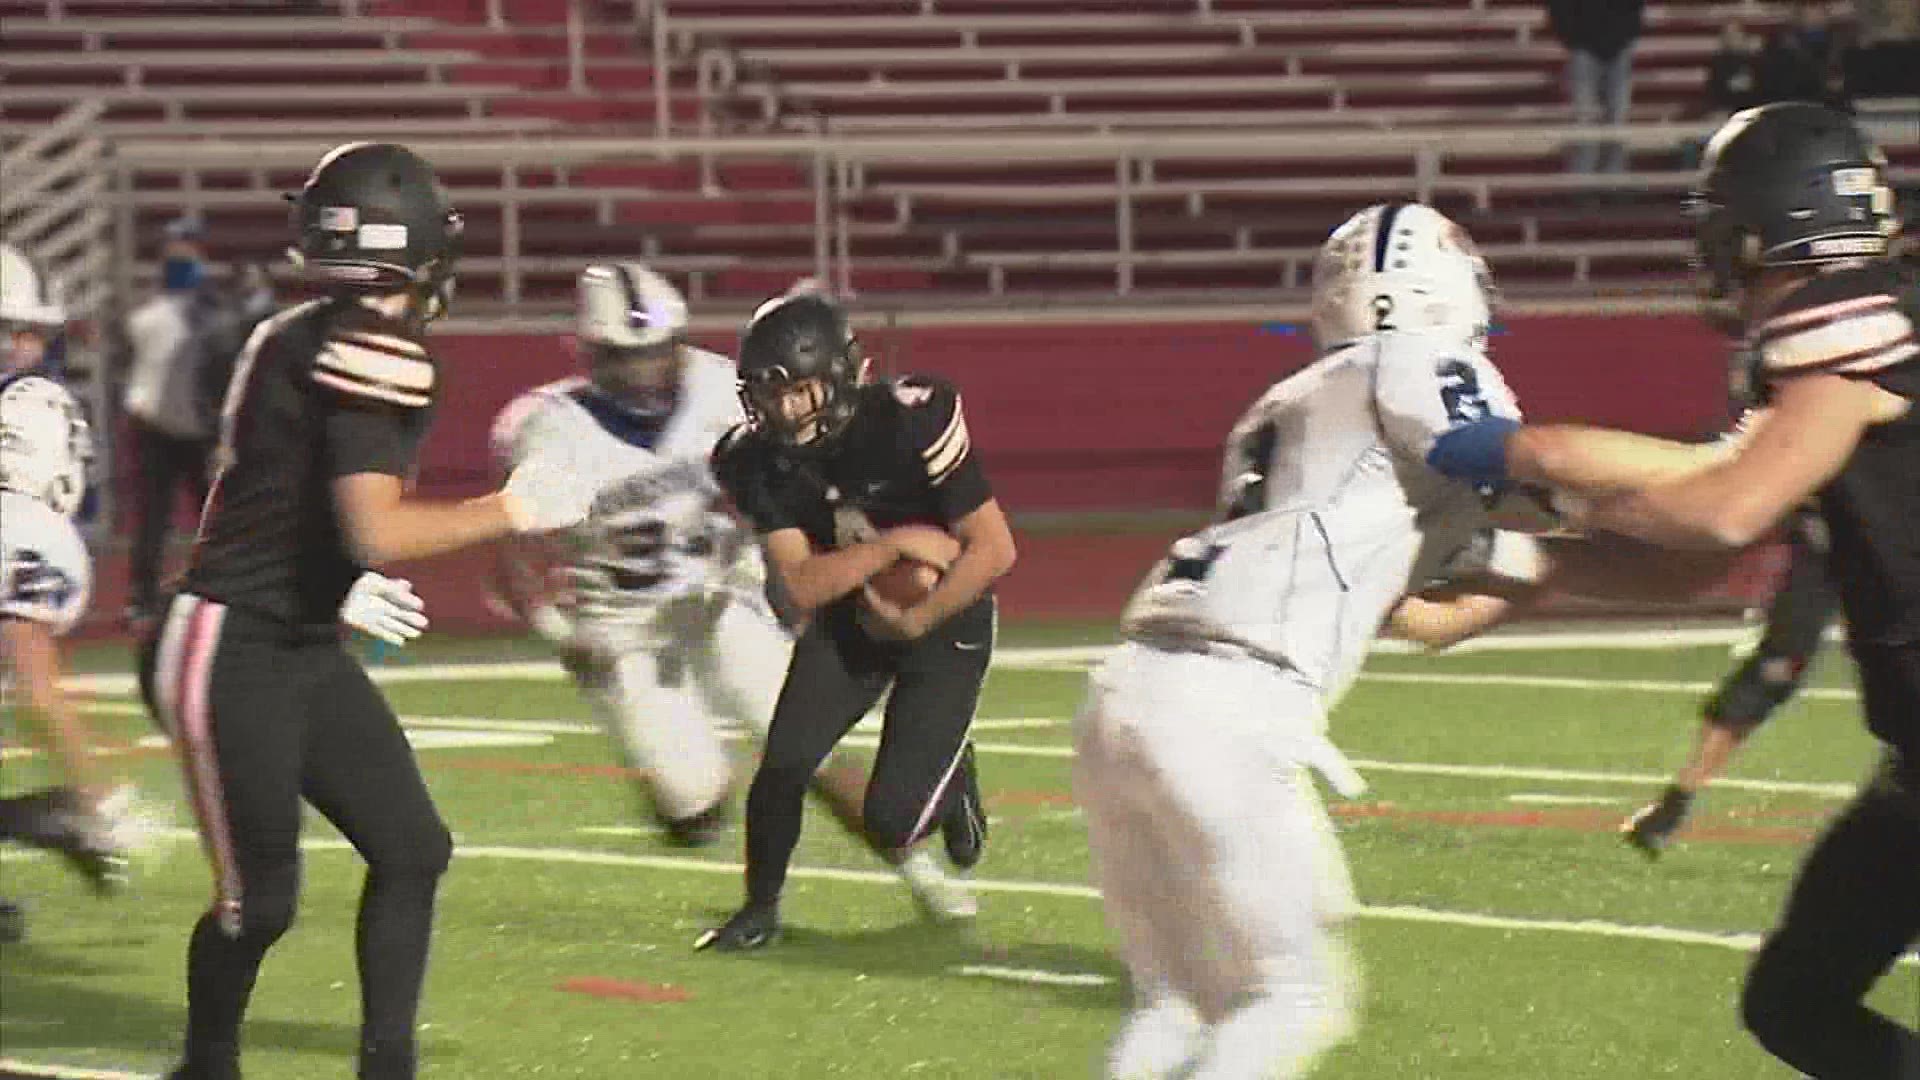 Dom Tiberi and Dave Holmes have week two high school football playoff highlights